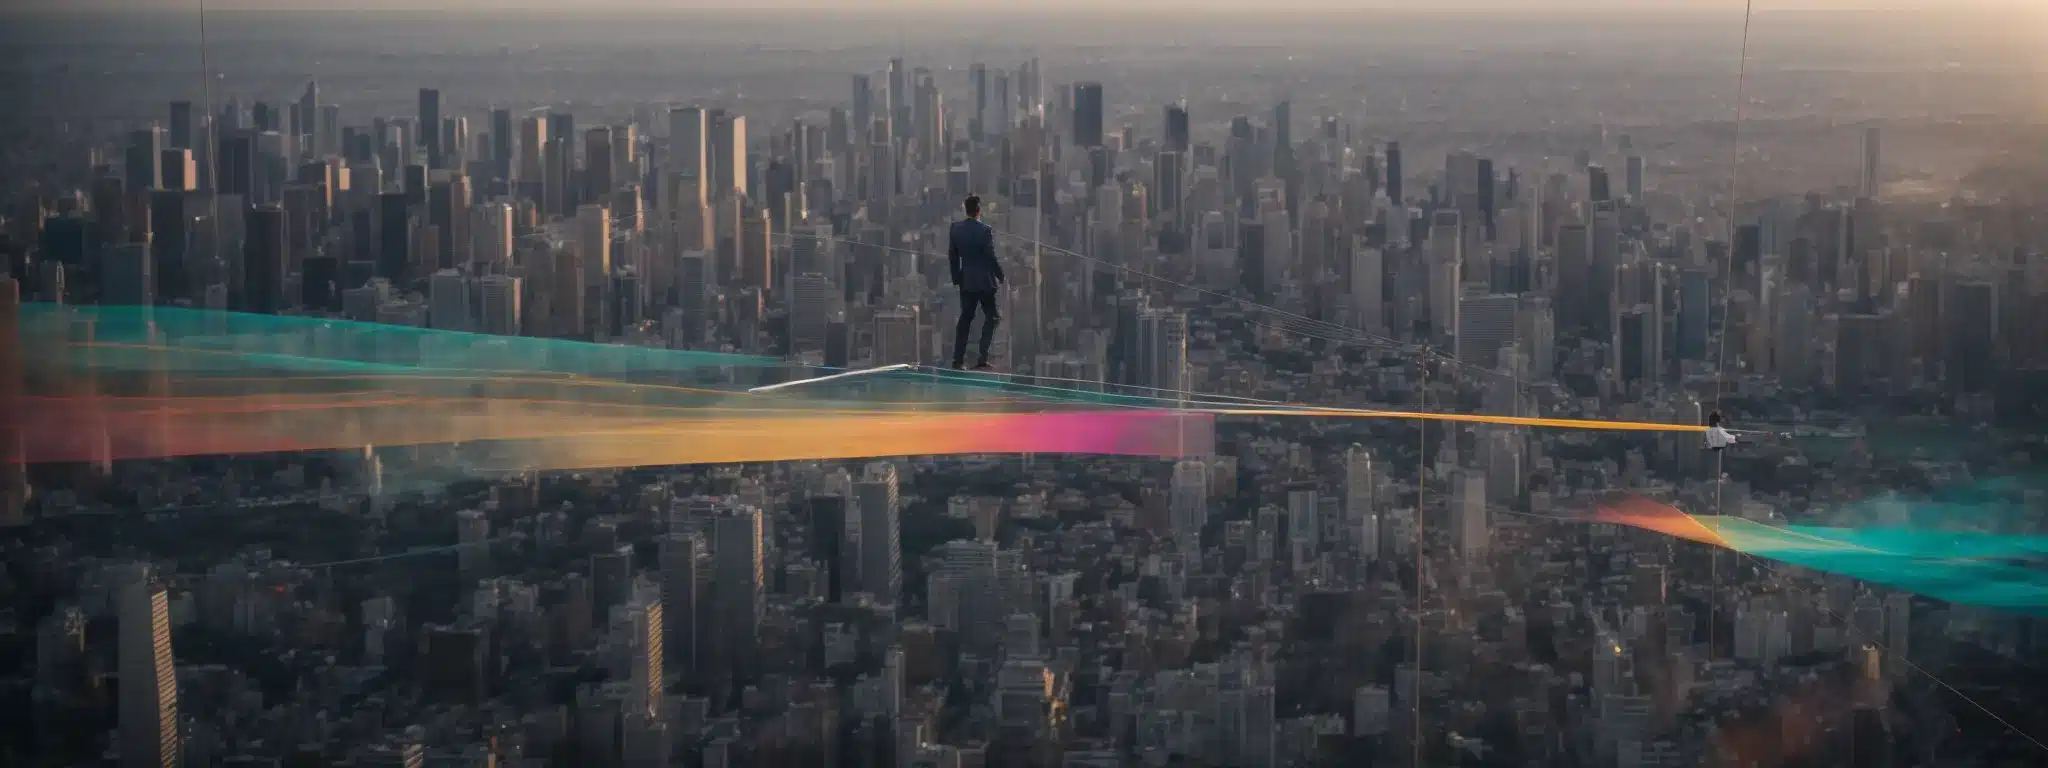 A Marketer Balances On A Tightrope Above A Digital Cityscape, Focusing Intently On A Floating Screen Displaying Colorful Analytics Charts.